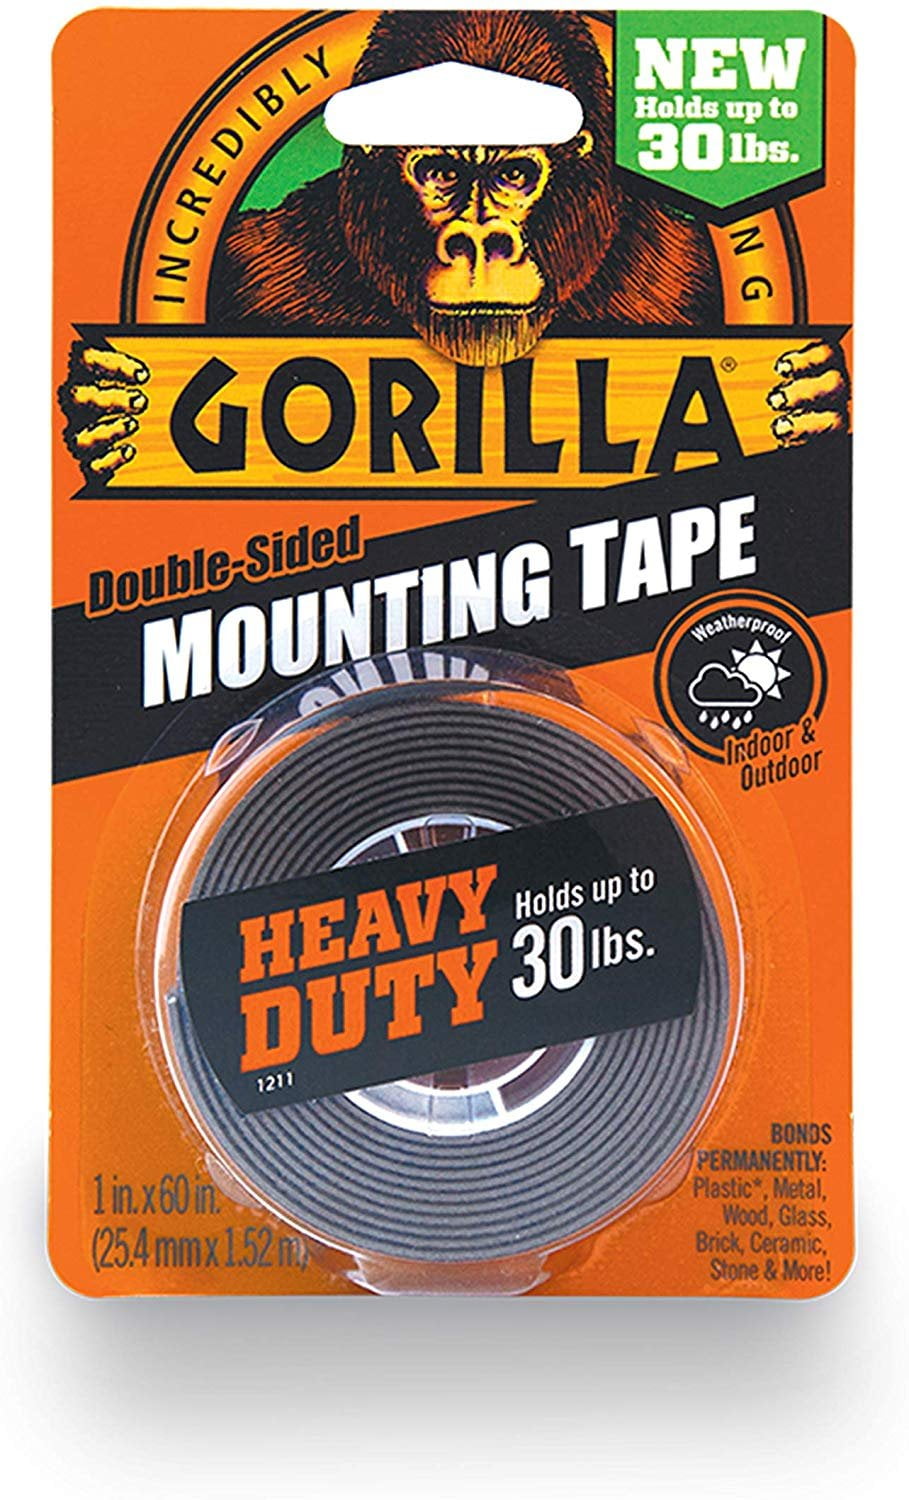 Gorilla Heavy Duty Double Sided Mounting Tape, 1 Inch x 60 Inches, Black 